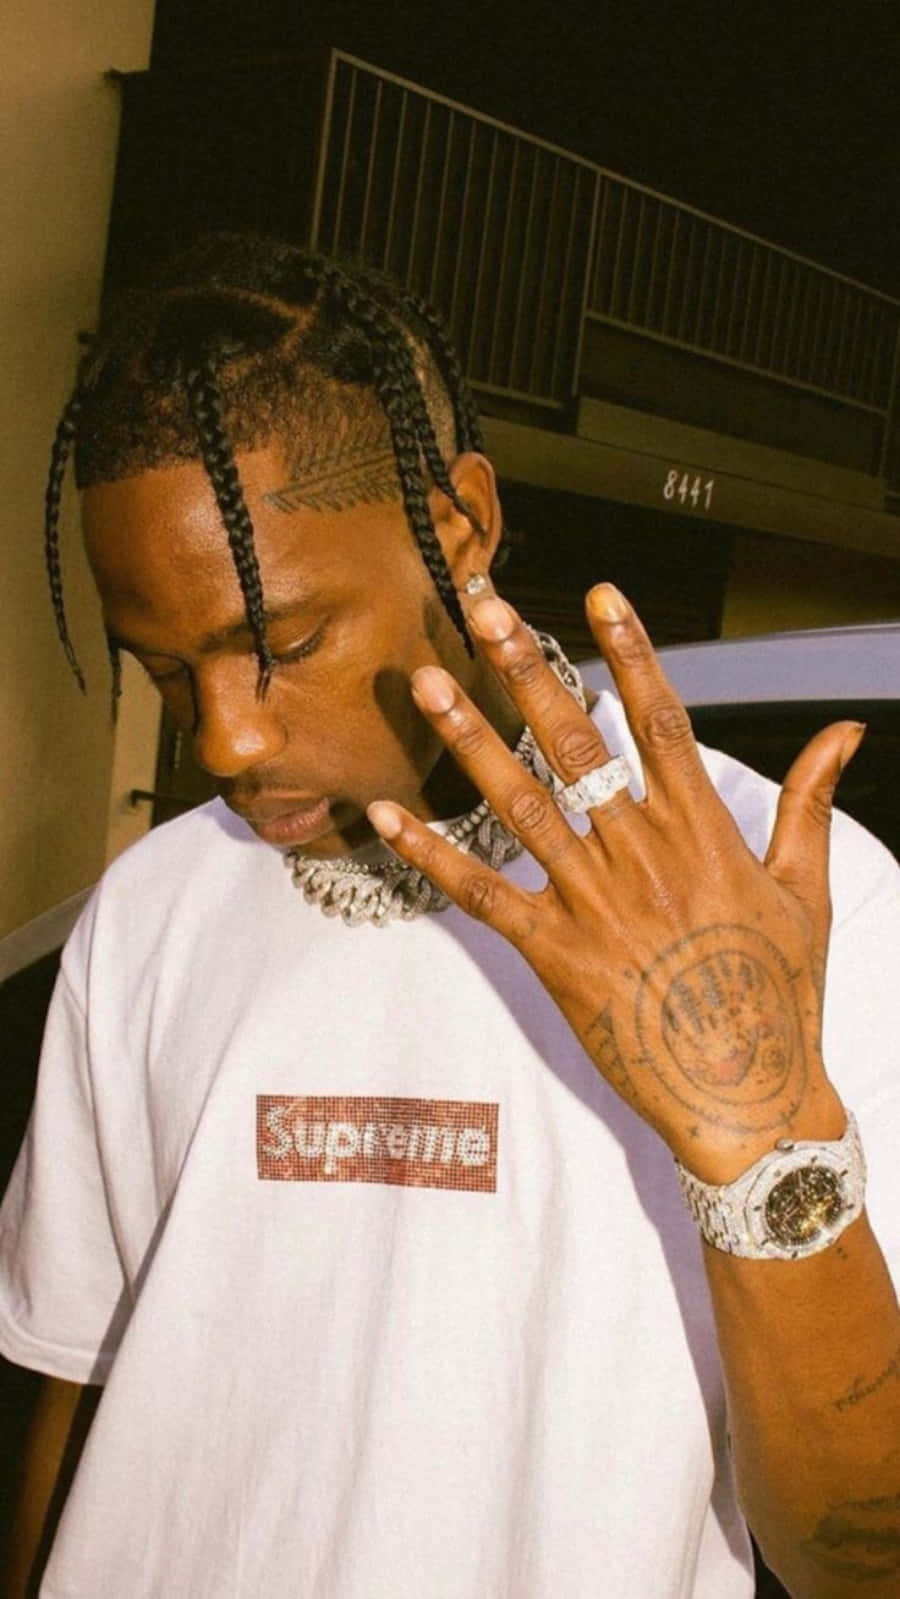 Travis Scott's music playing on the new iPhone Wallpaper